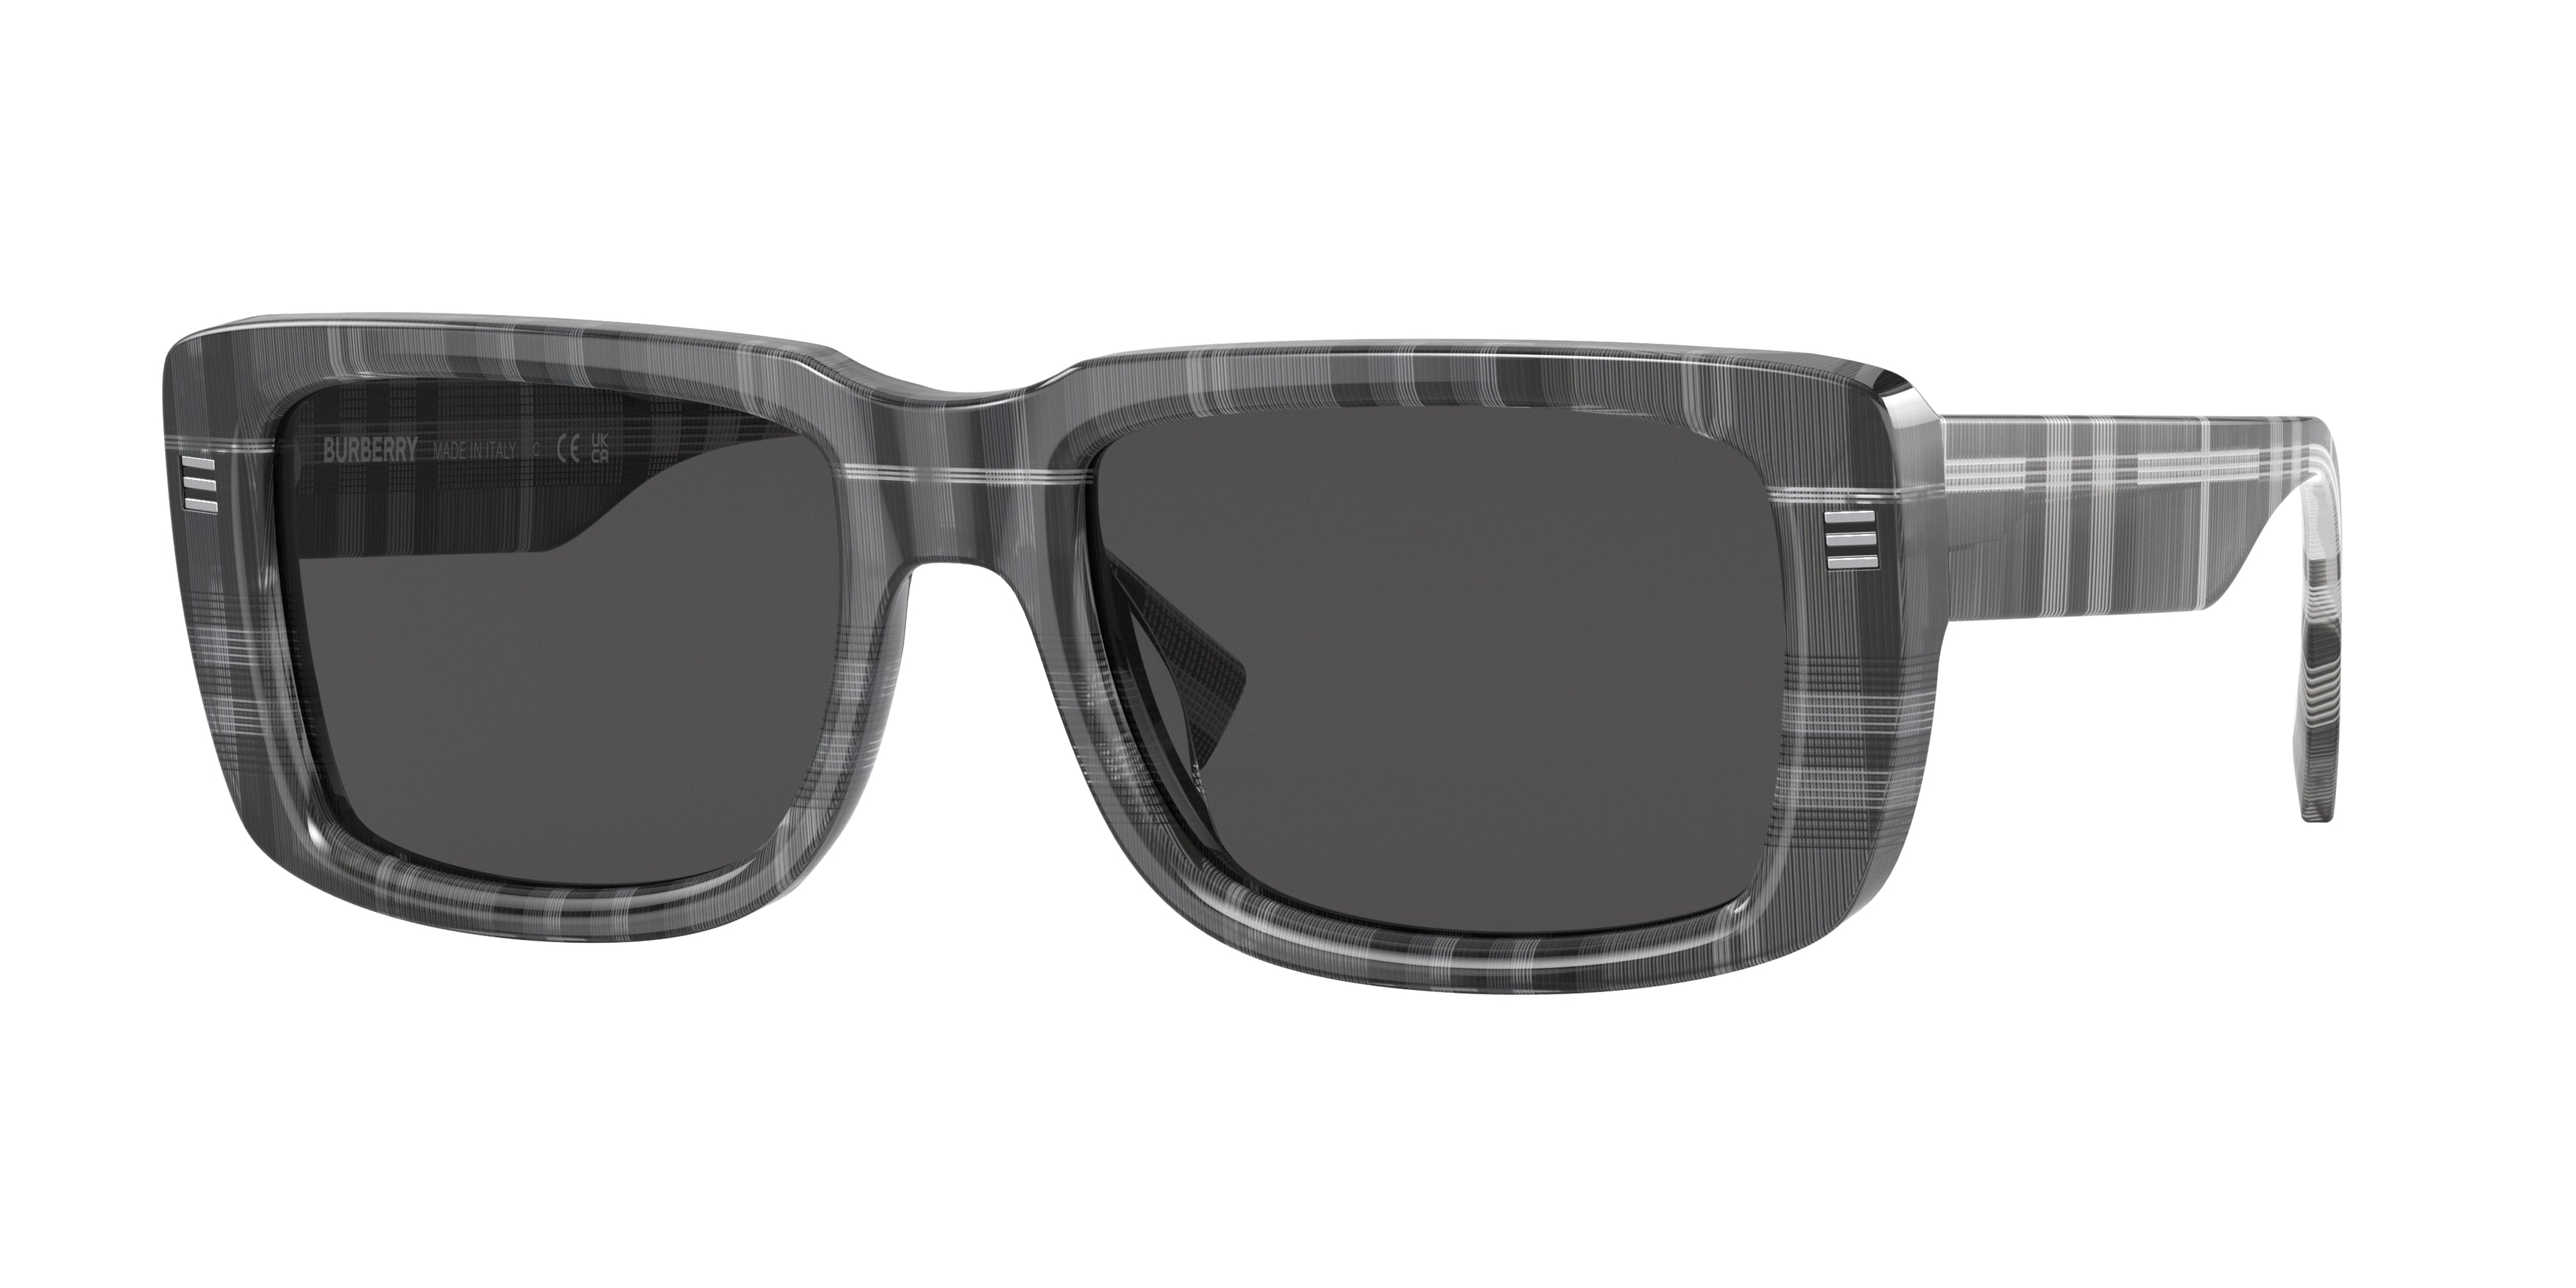 Burberry JARVIS BE4376U Rectangle Sunglasses  380487-Charcoal Check 55-150-19 - Color Map Grey